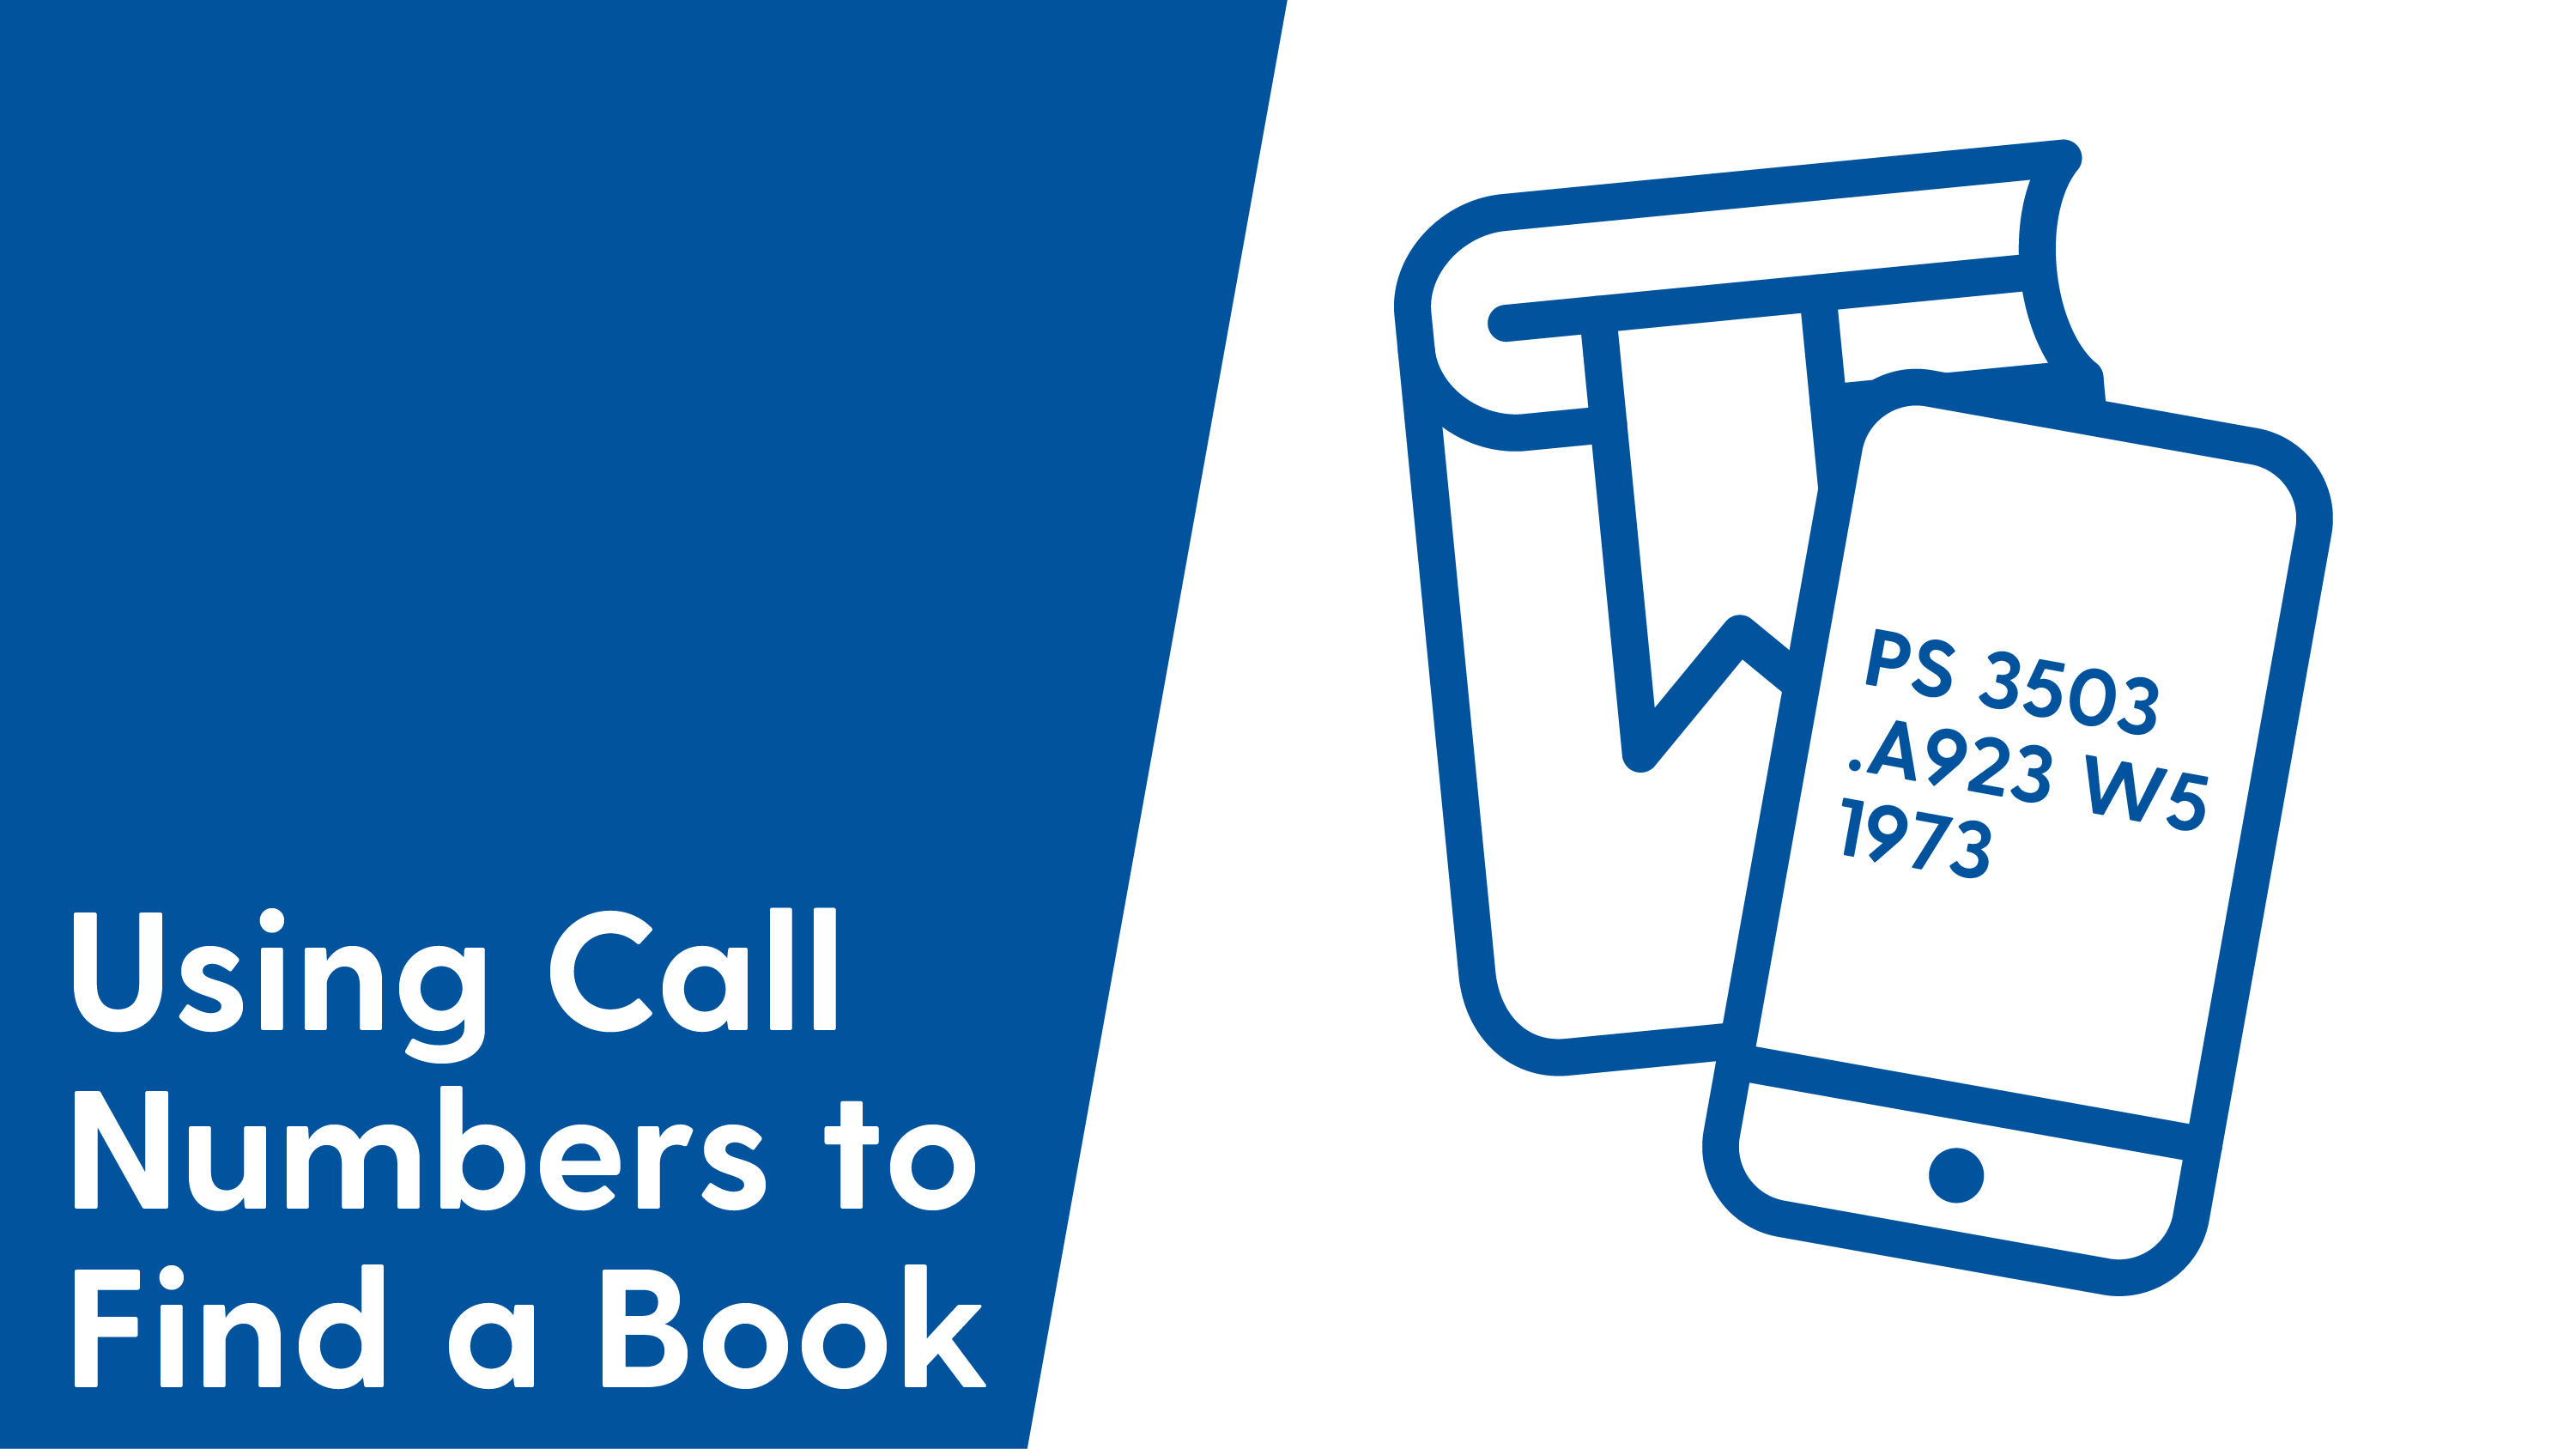 Using Call Numbers to Find a Book